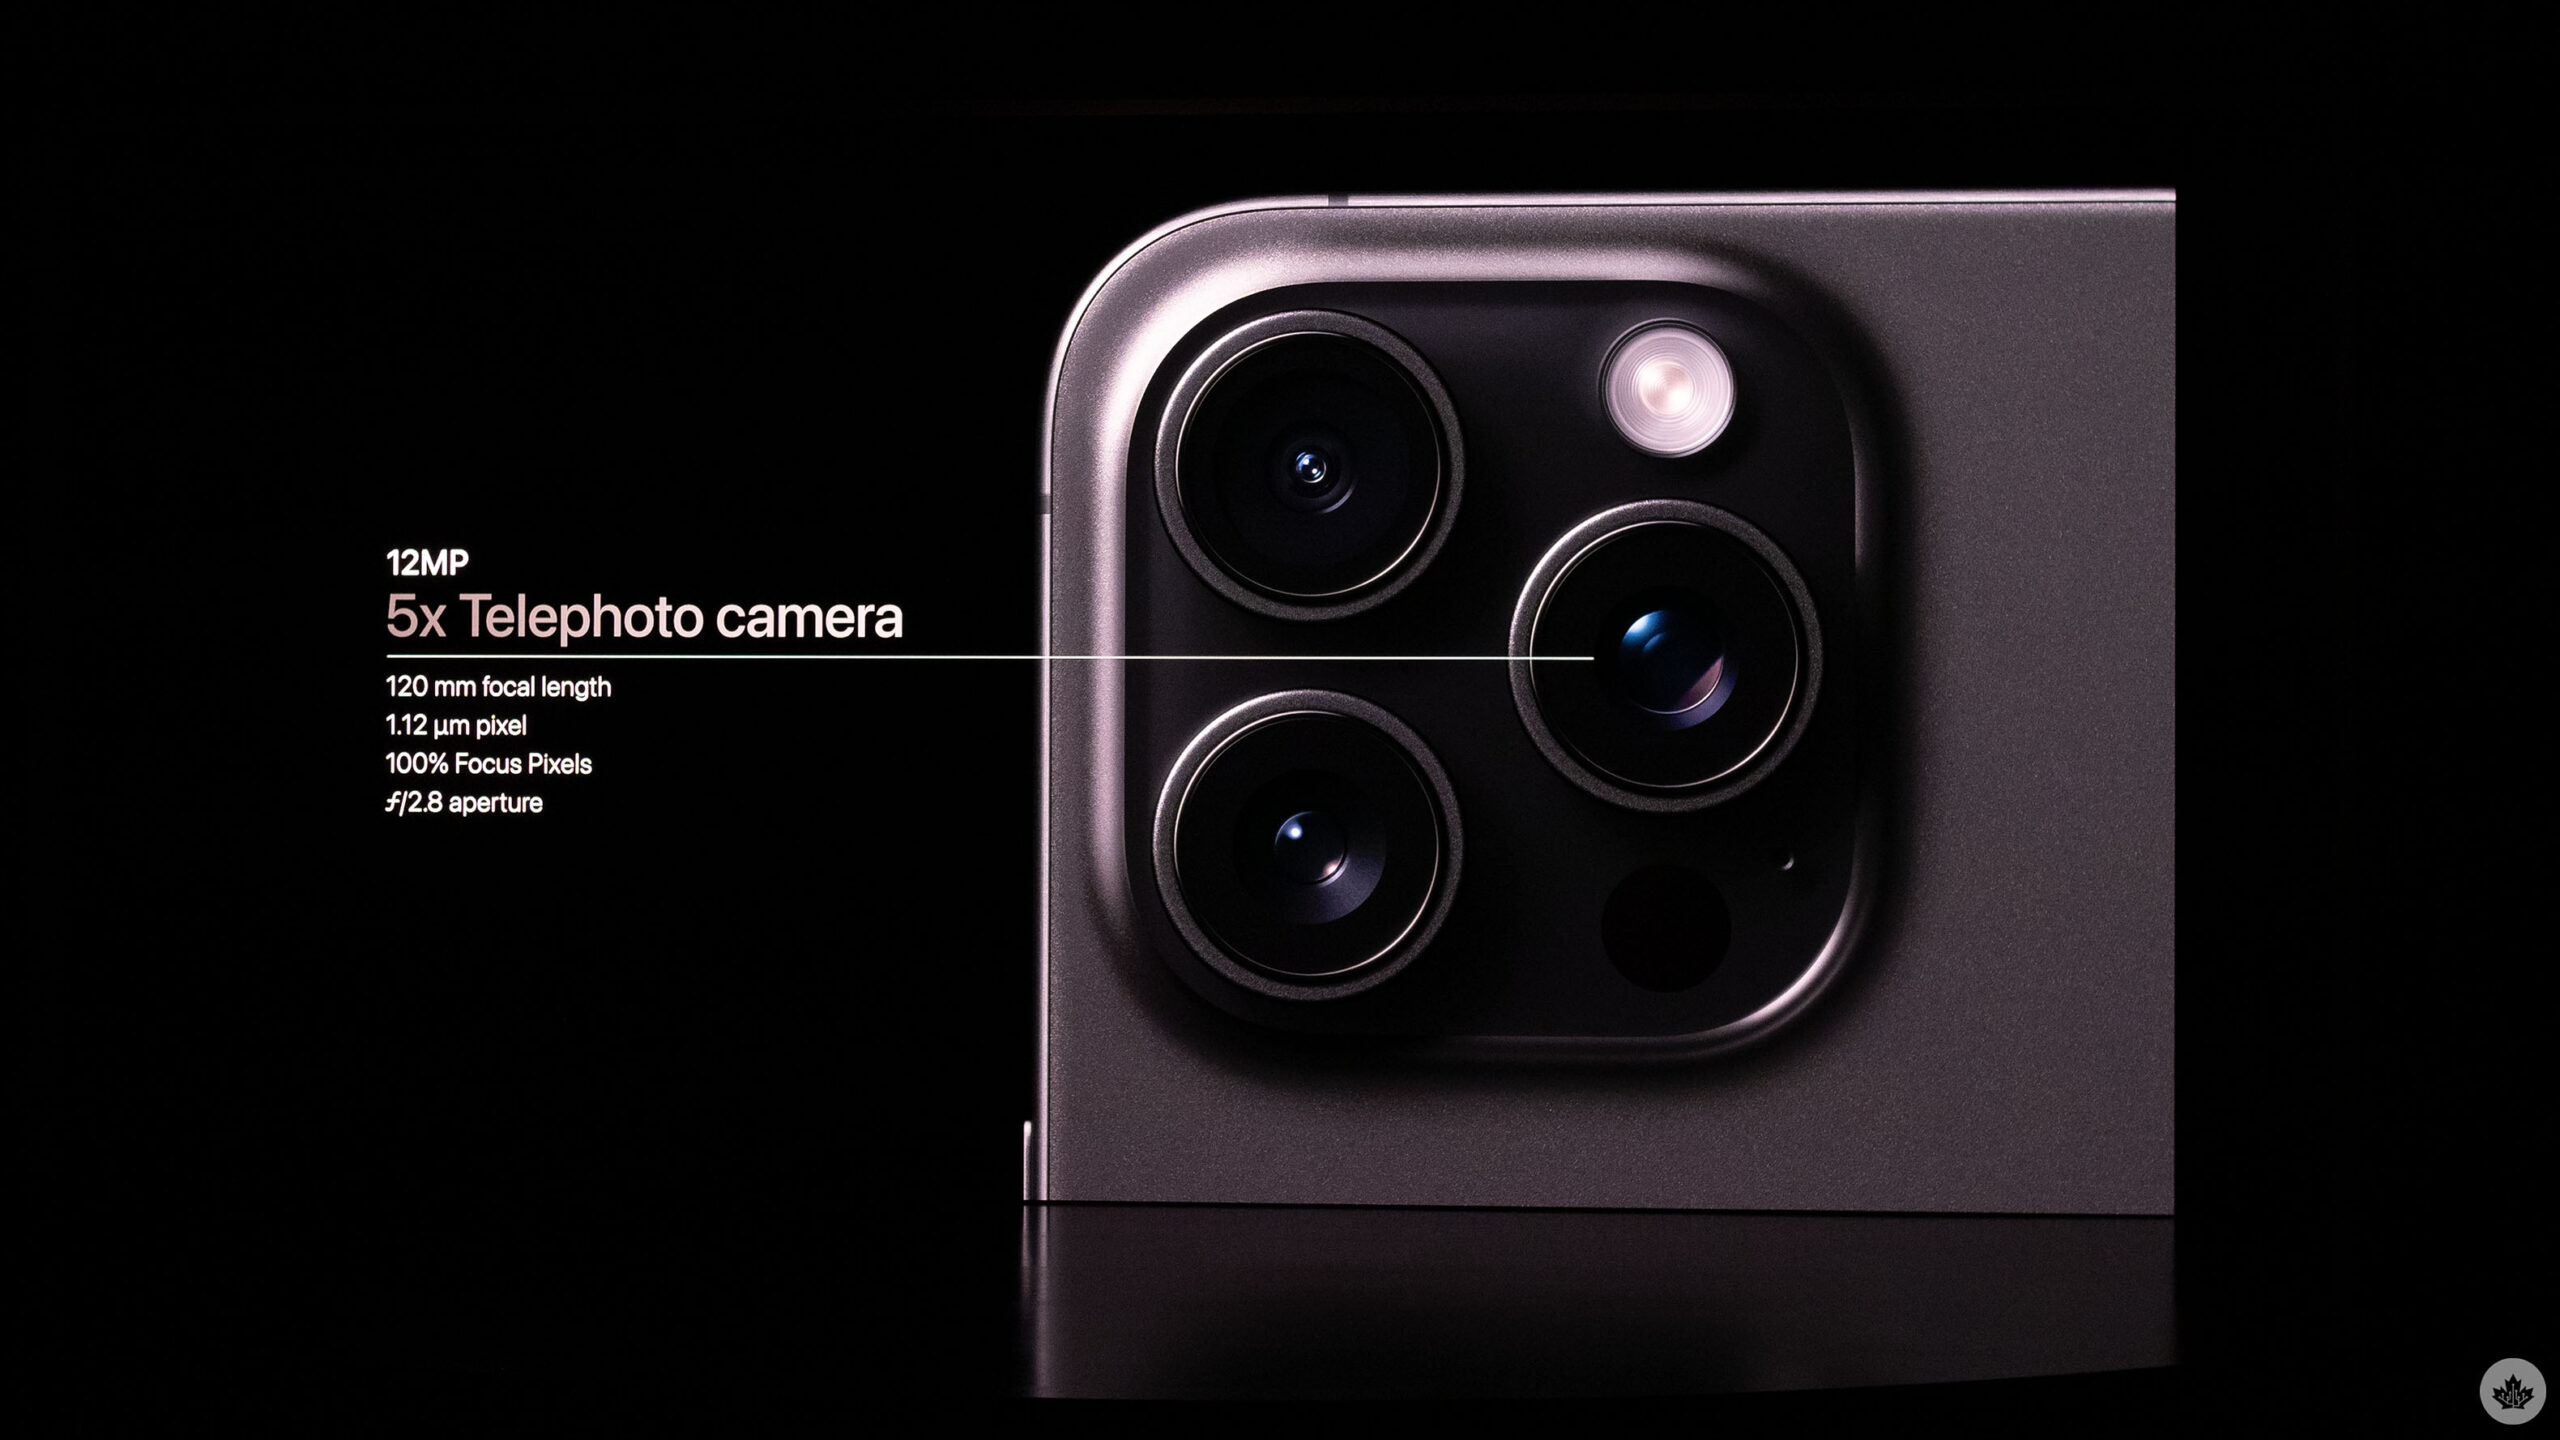 More reports suggest iPhone 16 Pro and Pro Max will get the tetraprism camera lens